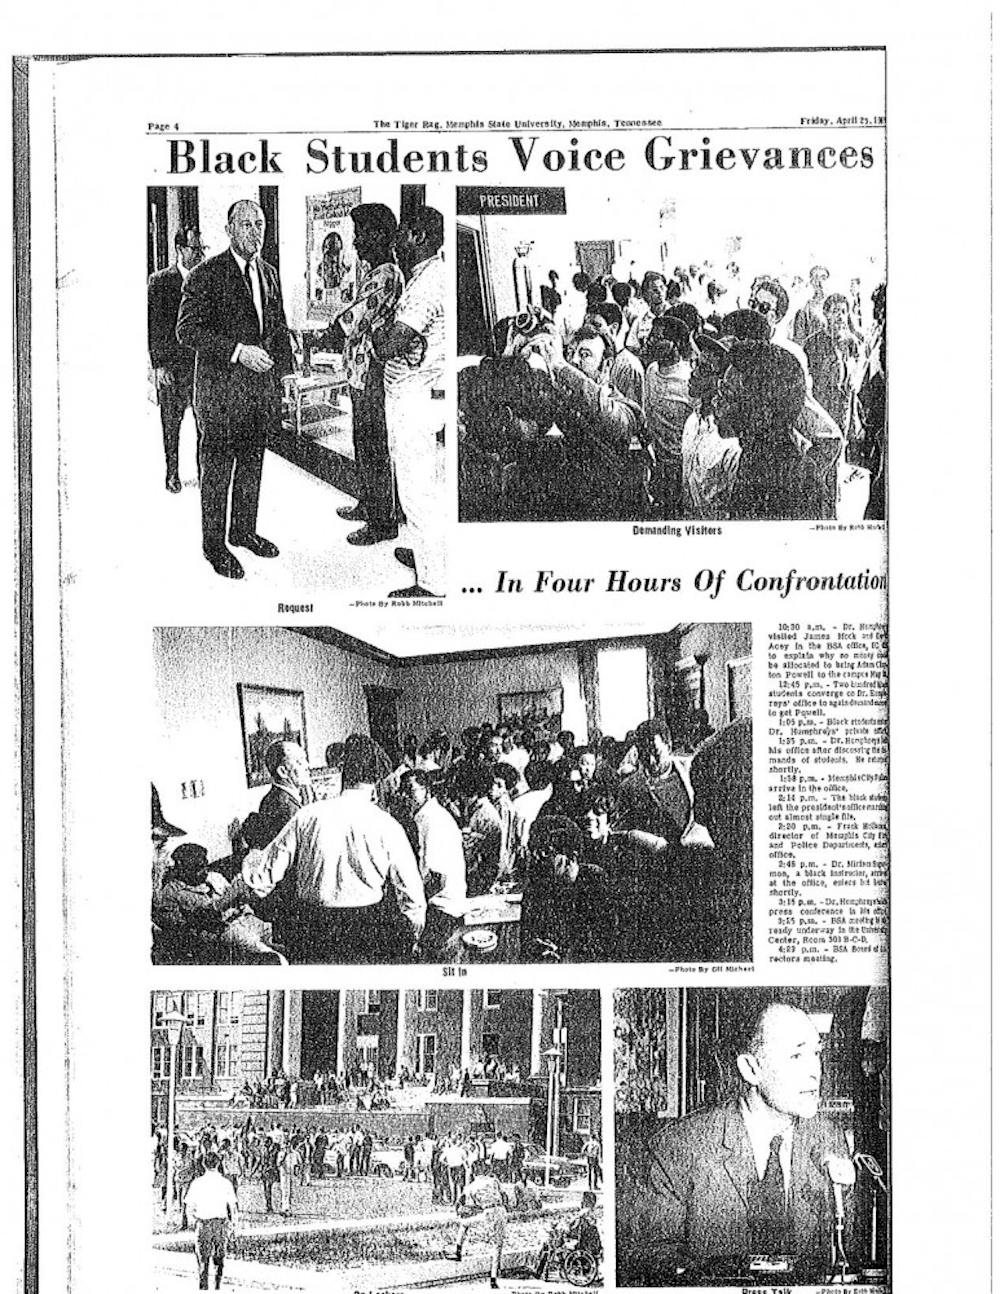 <p><em>The Tiger Rag</em>, the predecessor to <em>The Daily Helmsman</em>, covered the Black Student Association's sit-in at then-President Cecil C. Humphreys' office on April 24, 1969, with photos. The students demanded funding to bring Adam Clayton Powell to the university to speak.</p>